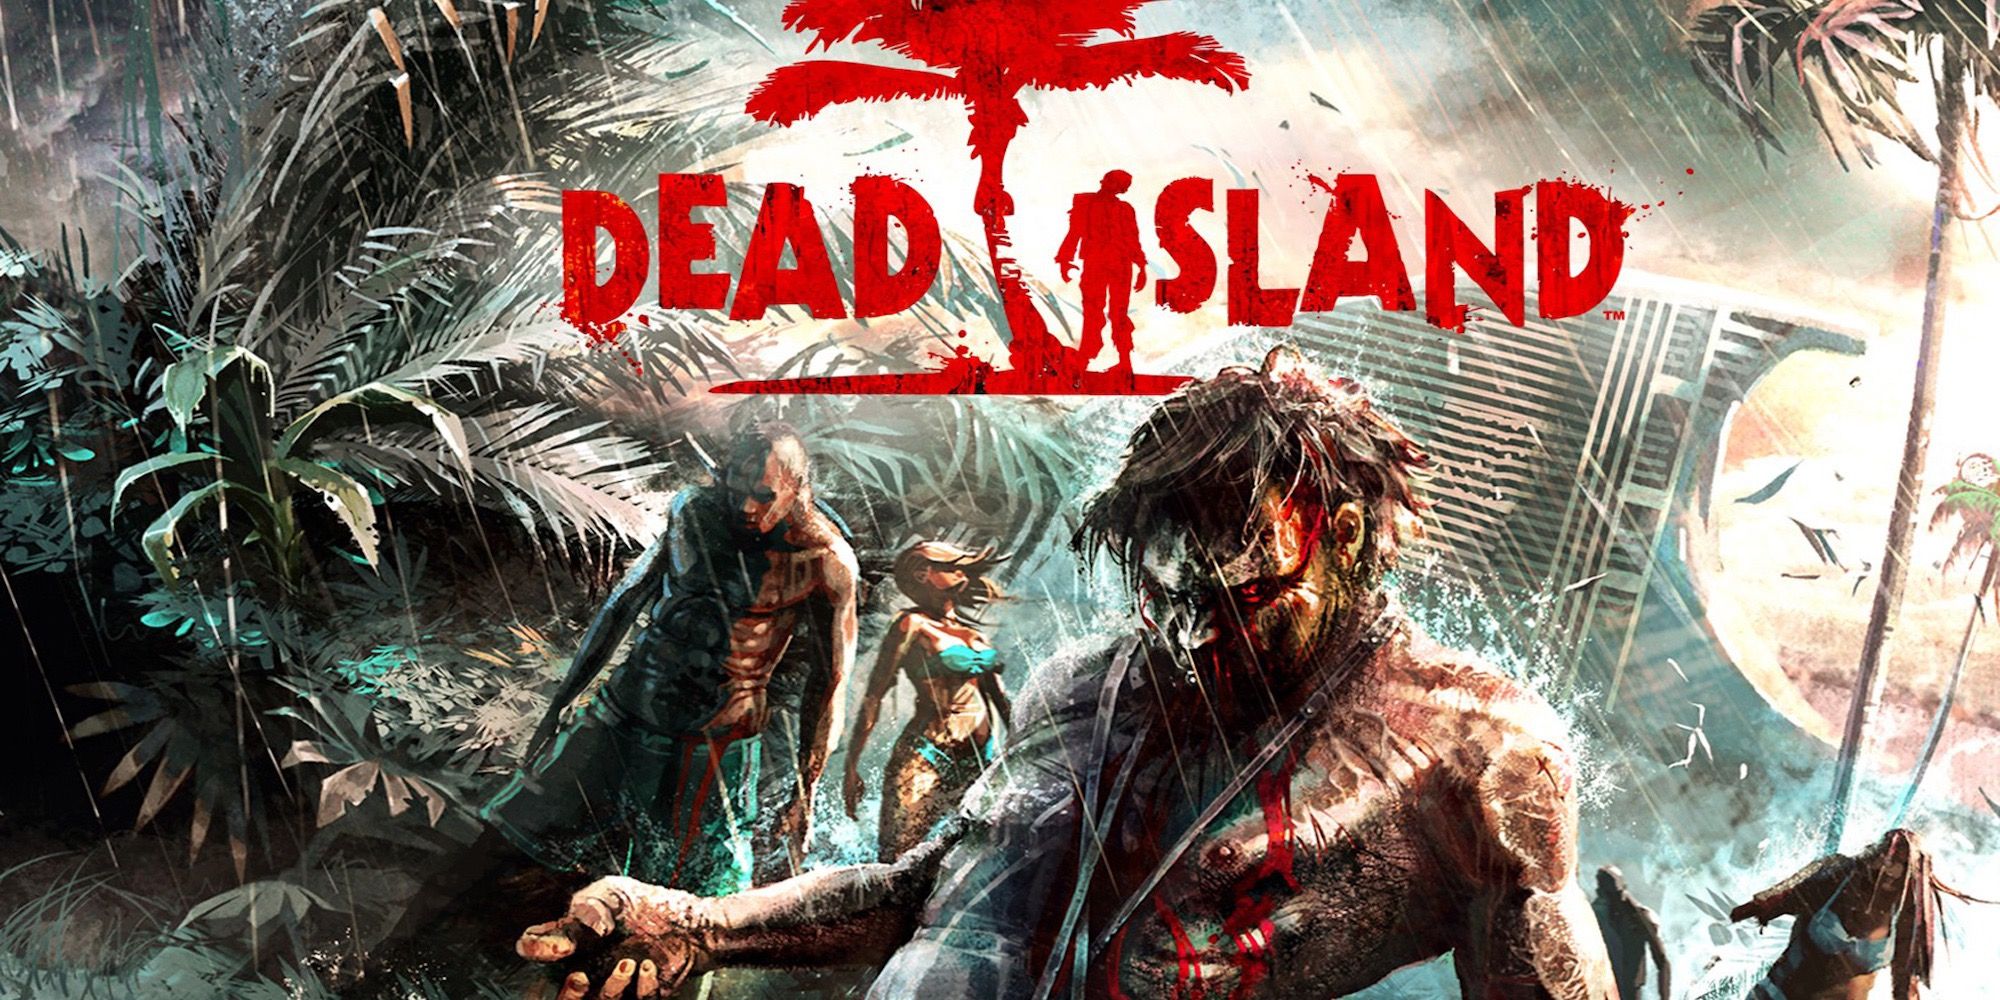 Promotional art featuring characters from Dead Island